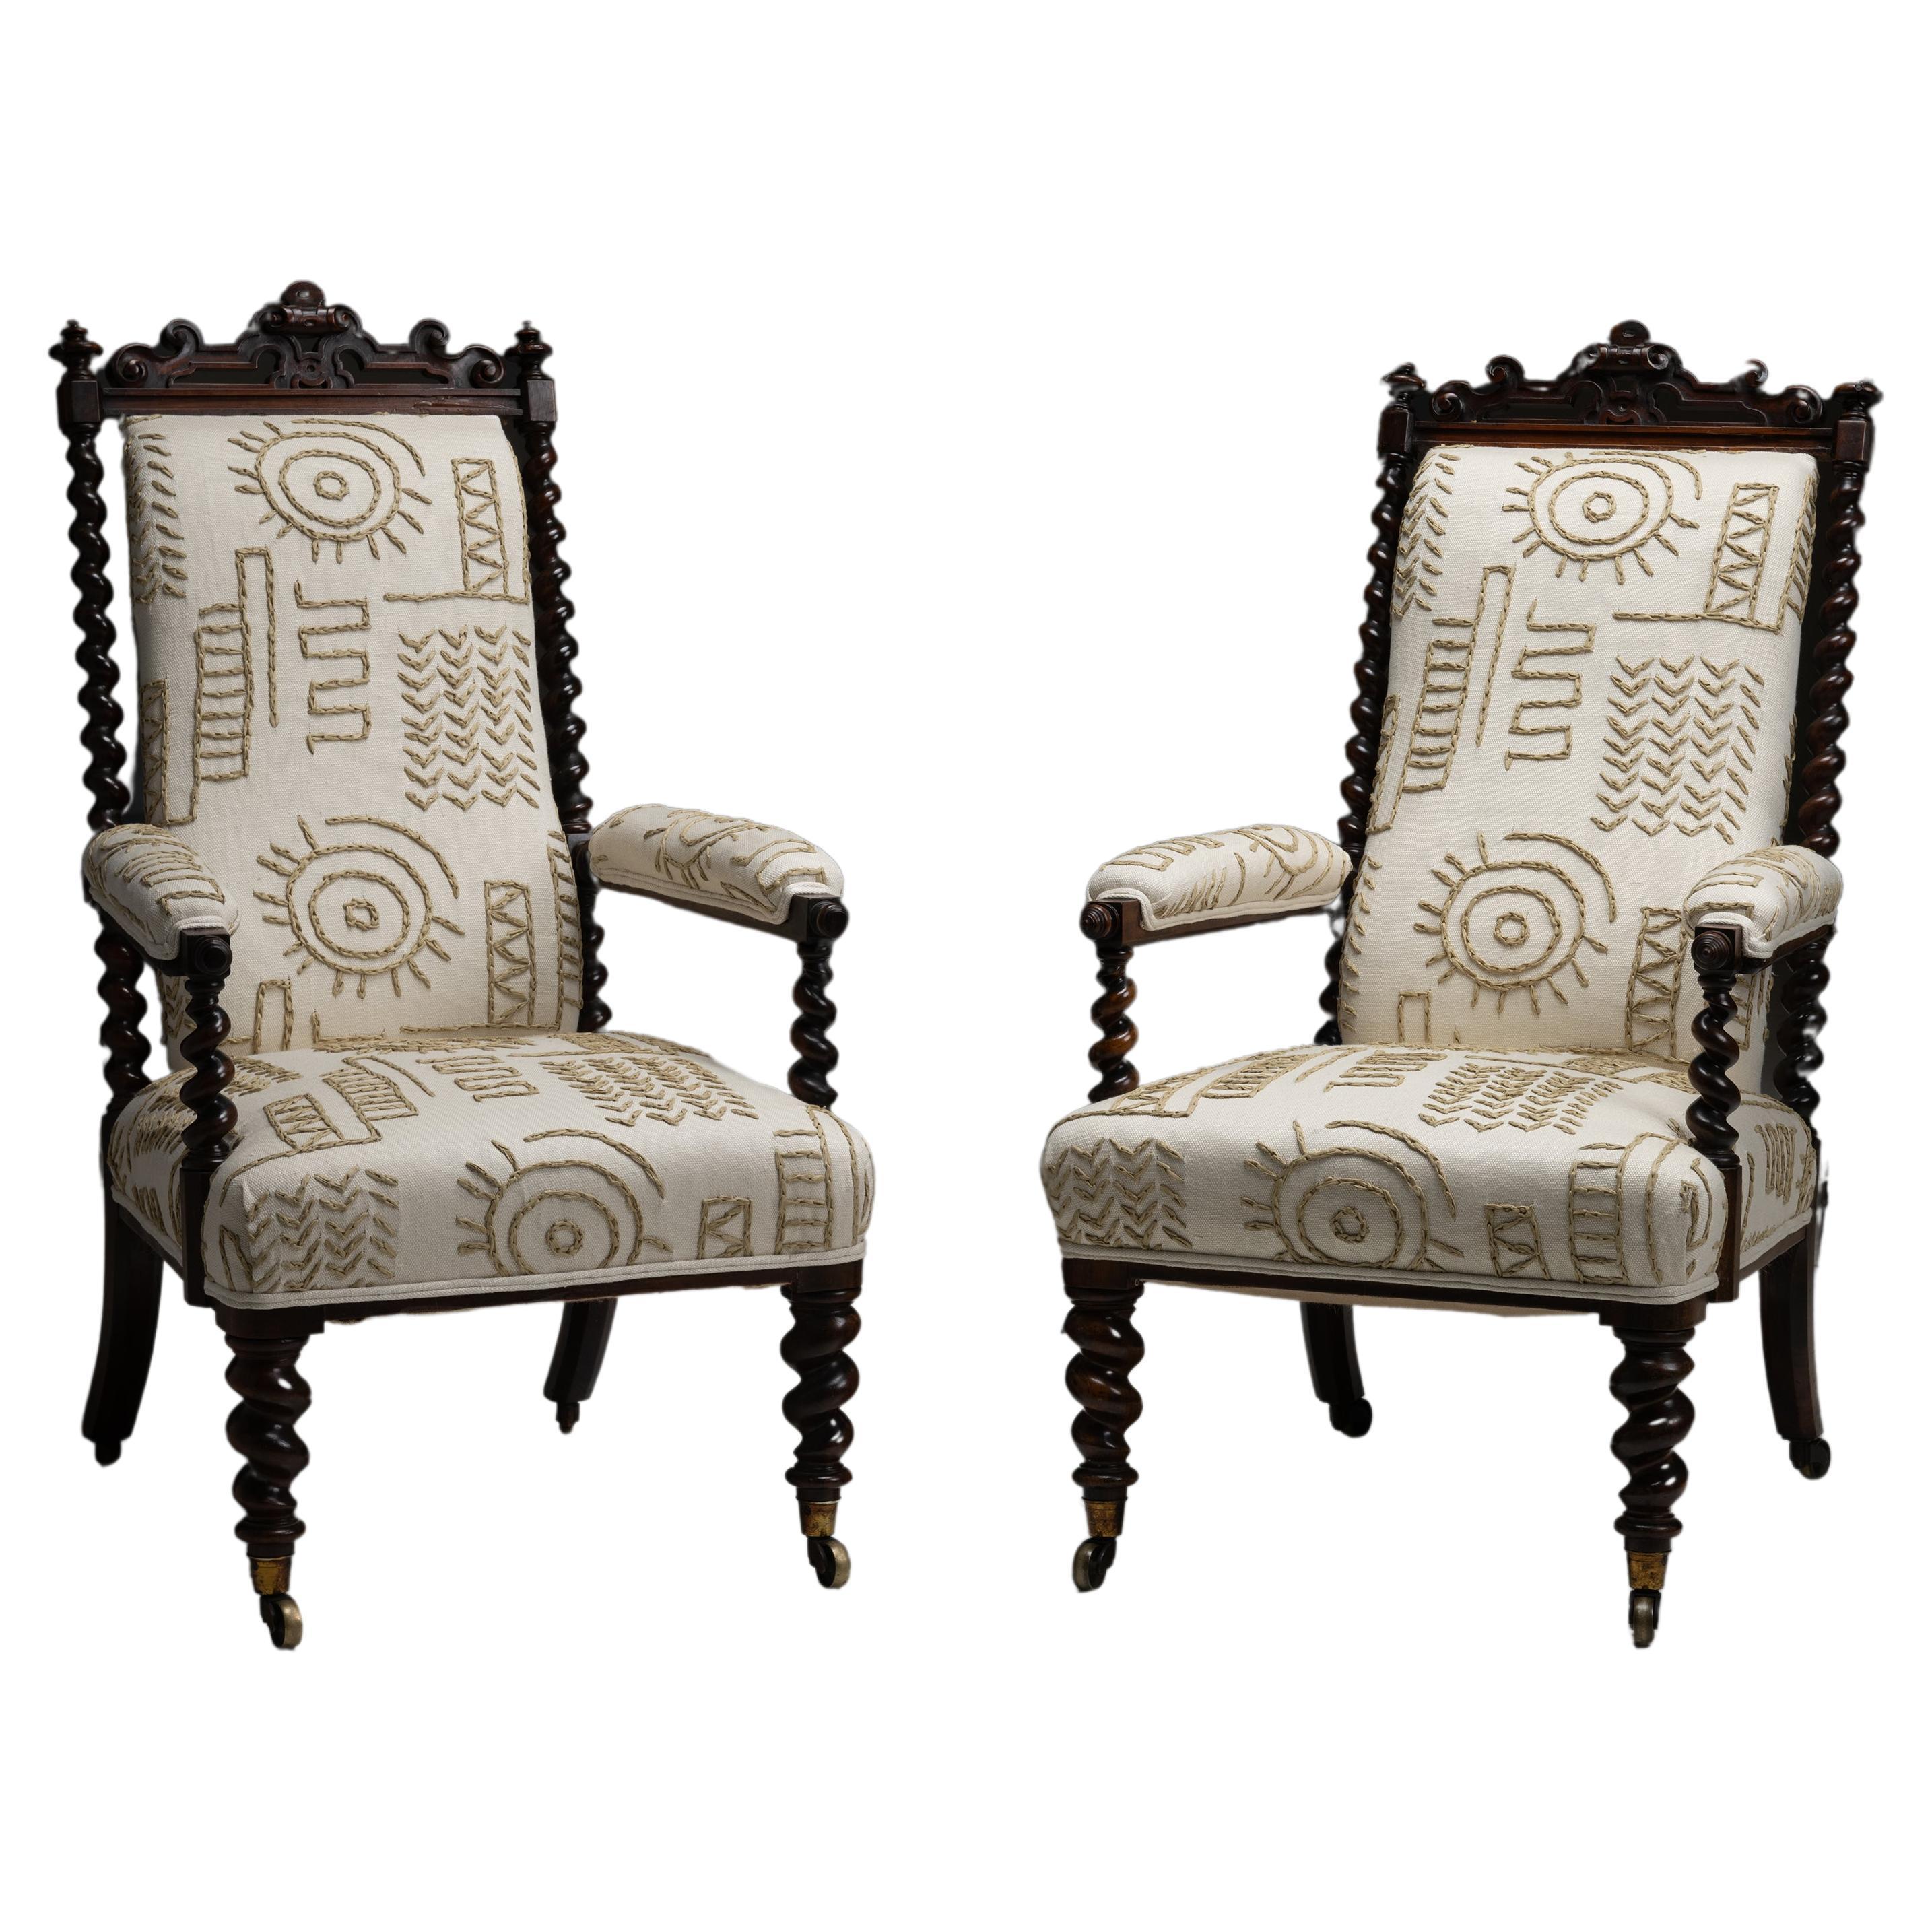 Armchairs by Miles & Edwards in Embroidered Linen, England circa 1835